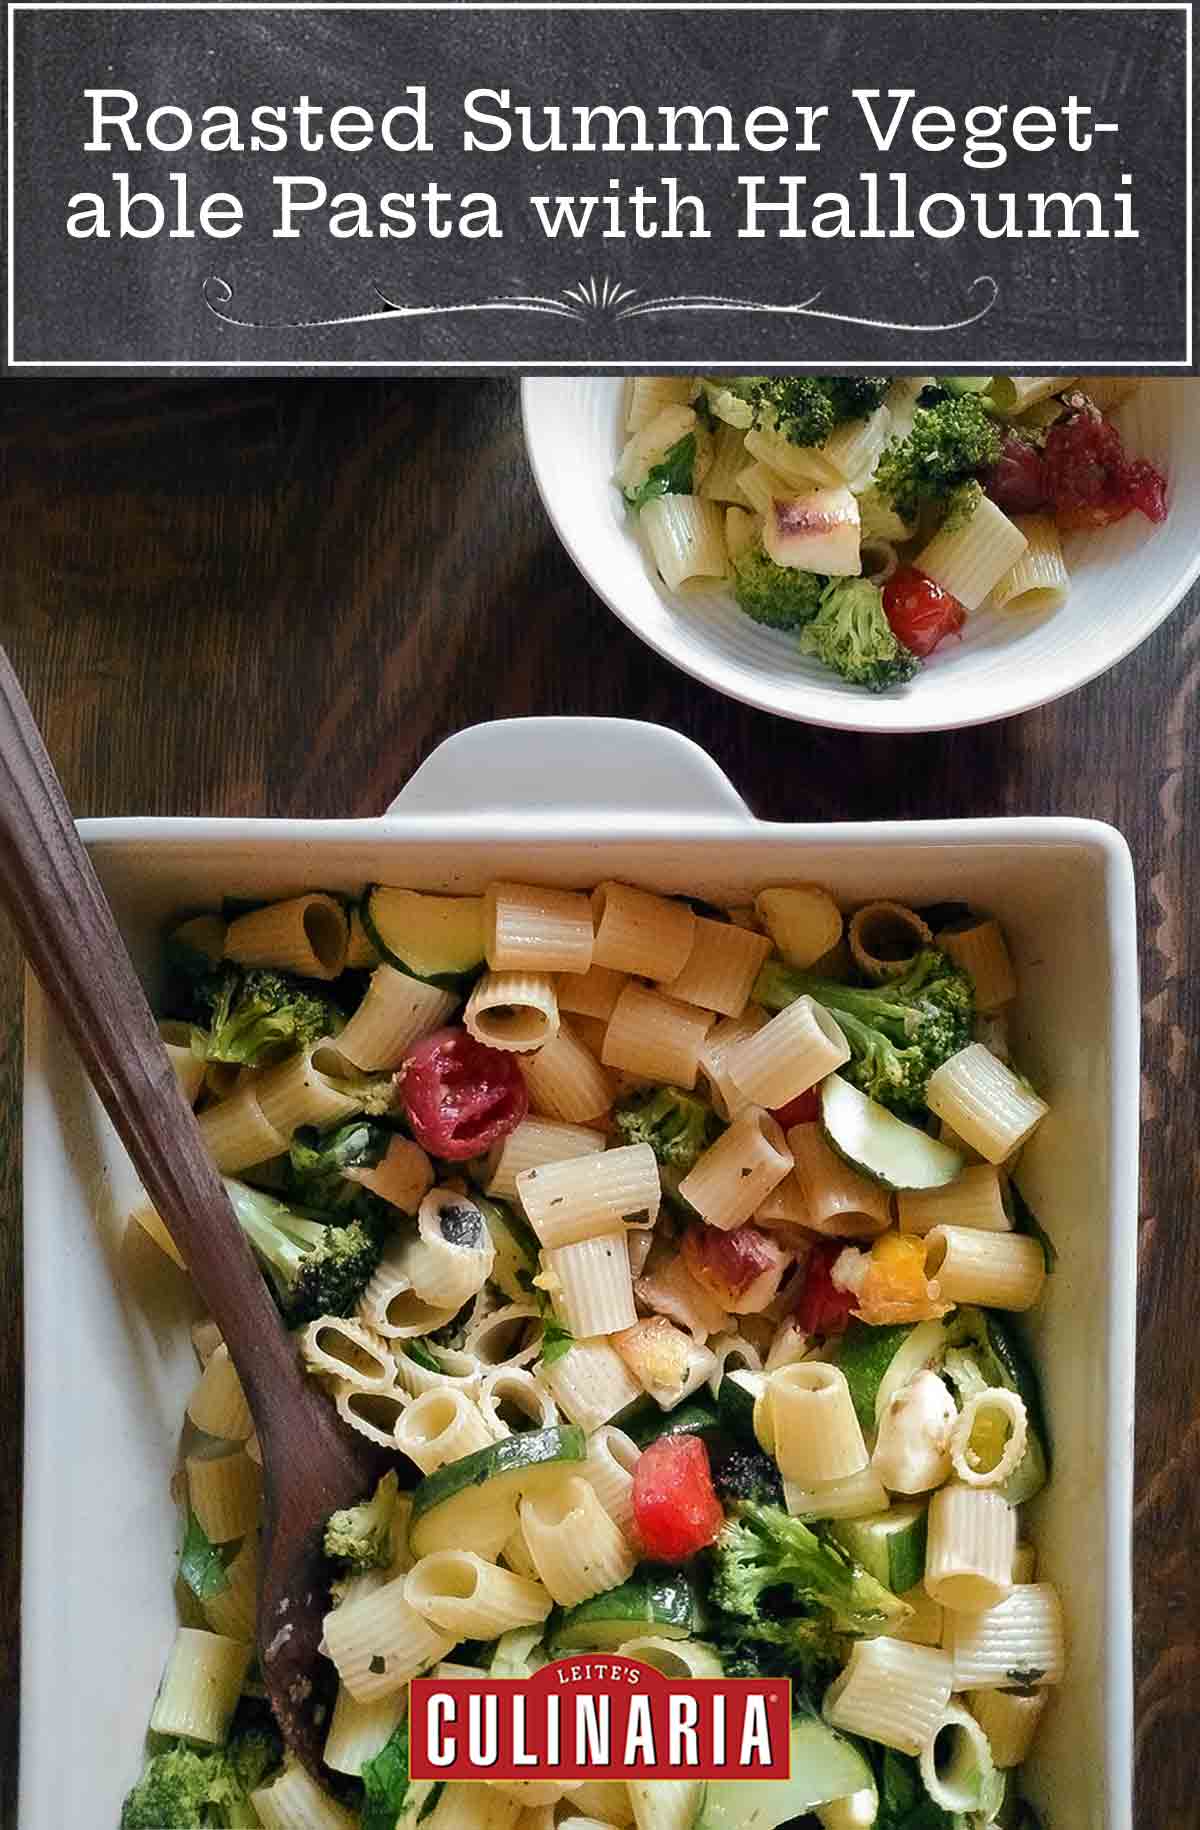 A white baking dish filled with small pasta, chopped broccoli, red peppers, zucchini, and chunks of halloumi cheese, beside a white bowl containing the same.